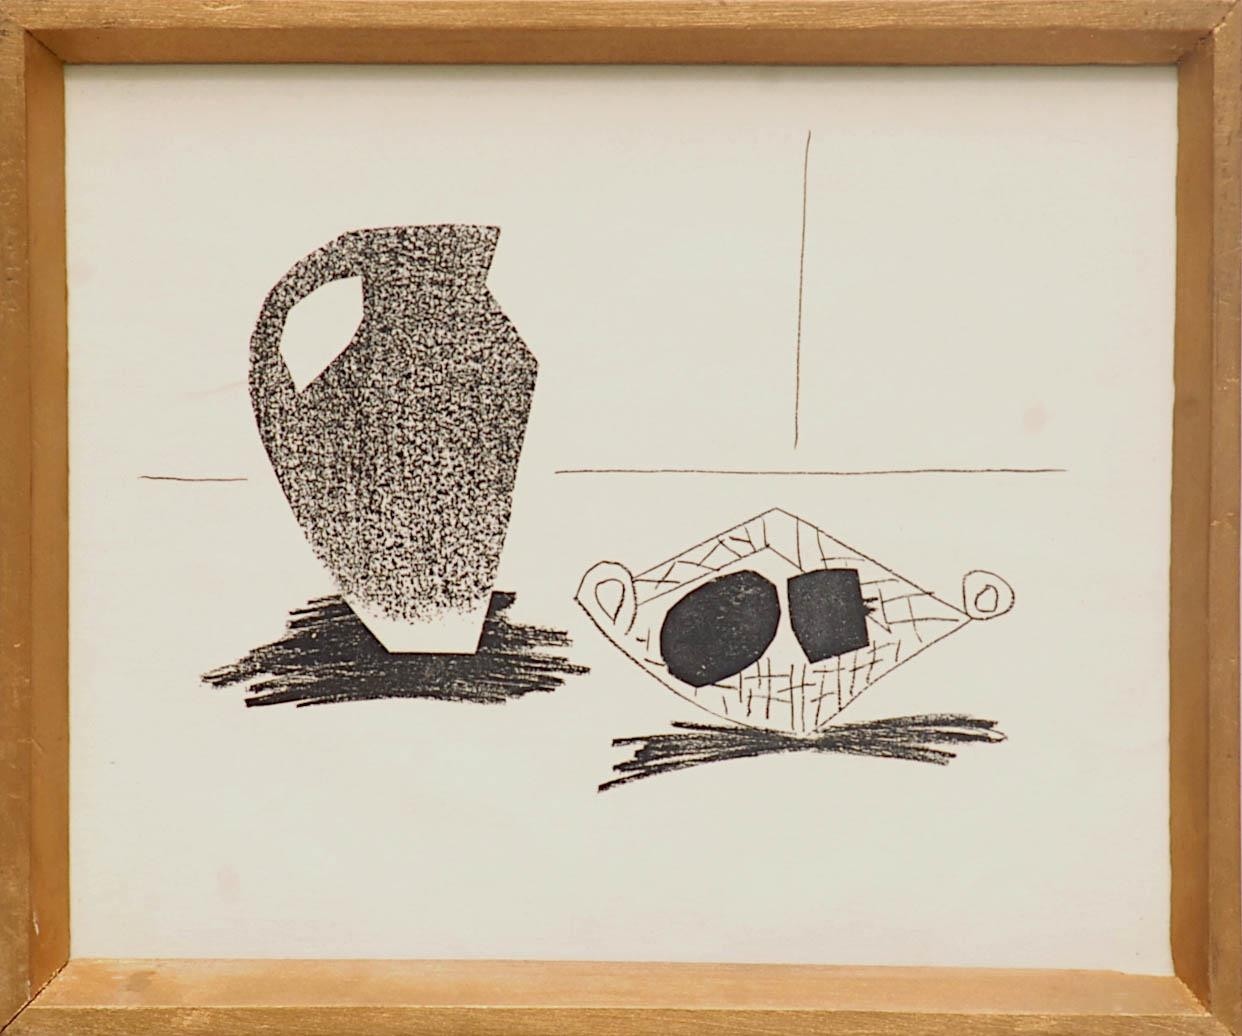 PABLO PICASSO 'Jug with Still Life', 1959, lithograph, Cincinnati Suite, printed by Young & Klein,